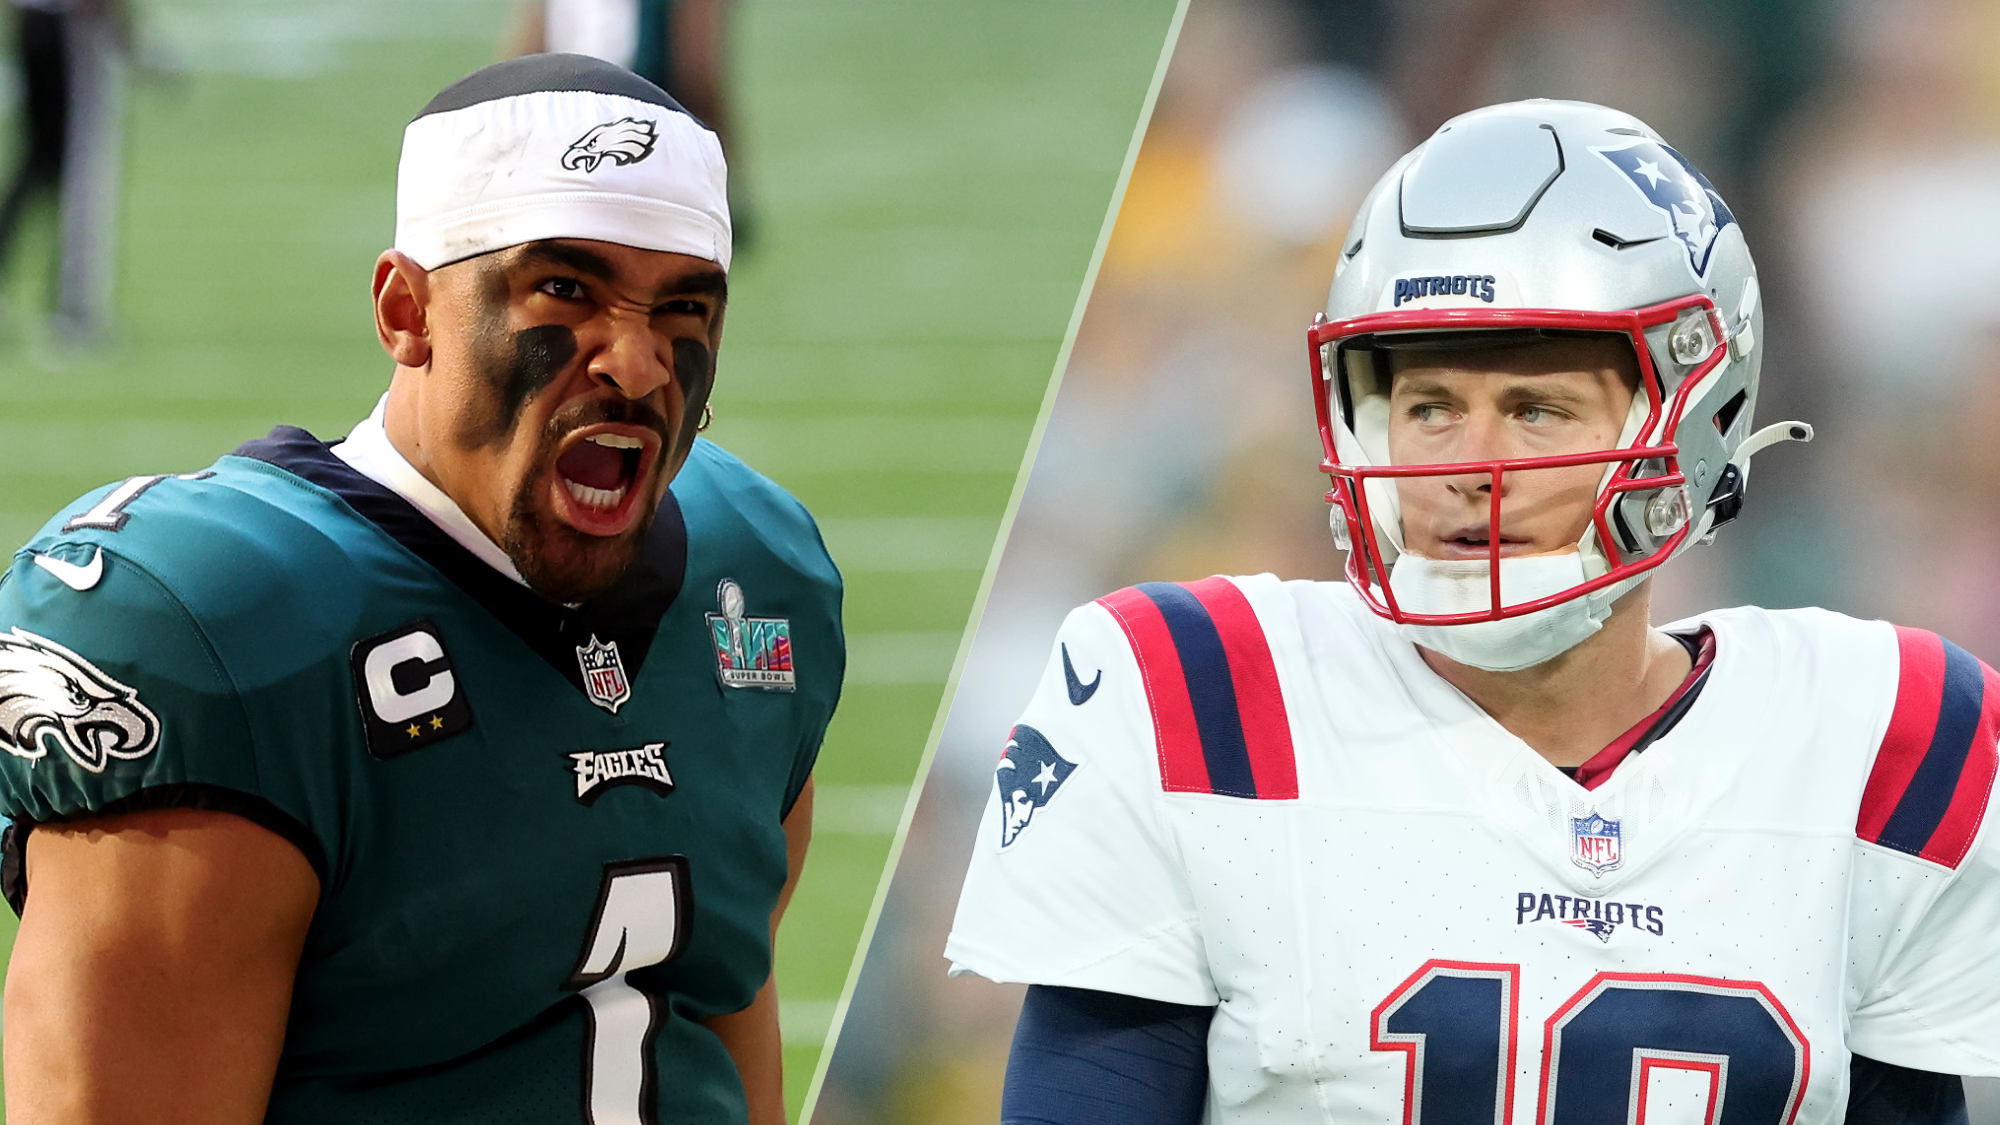 Eagles vs Patriots live stream: How to watch NFL week 1 online